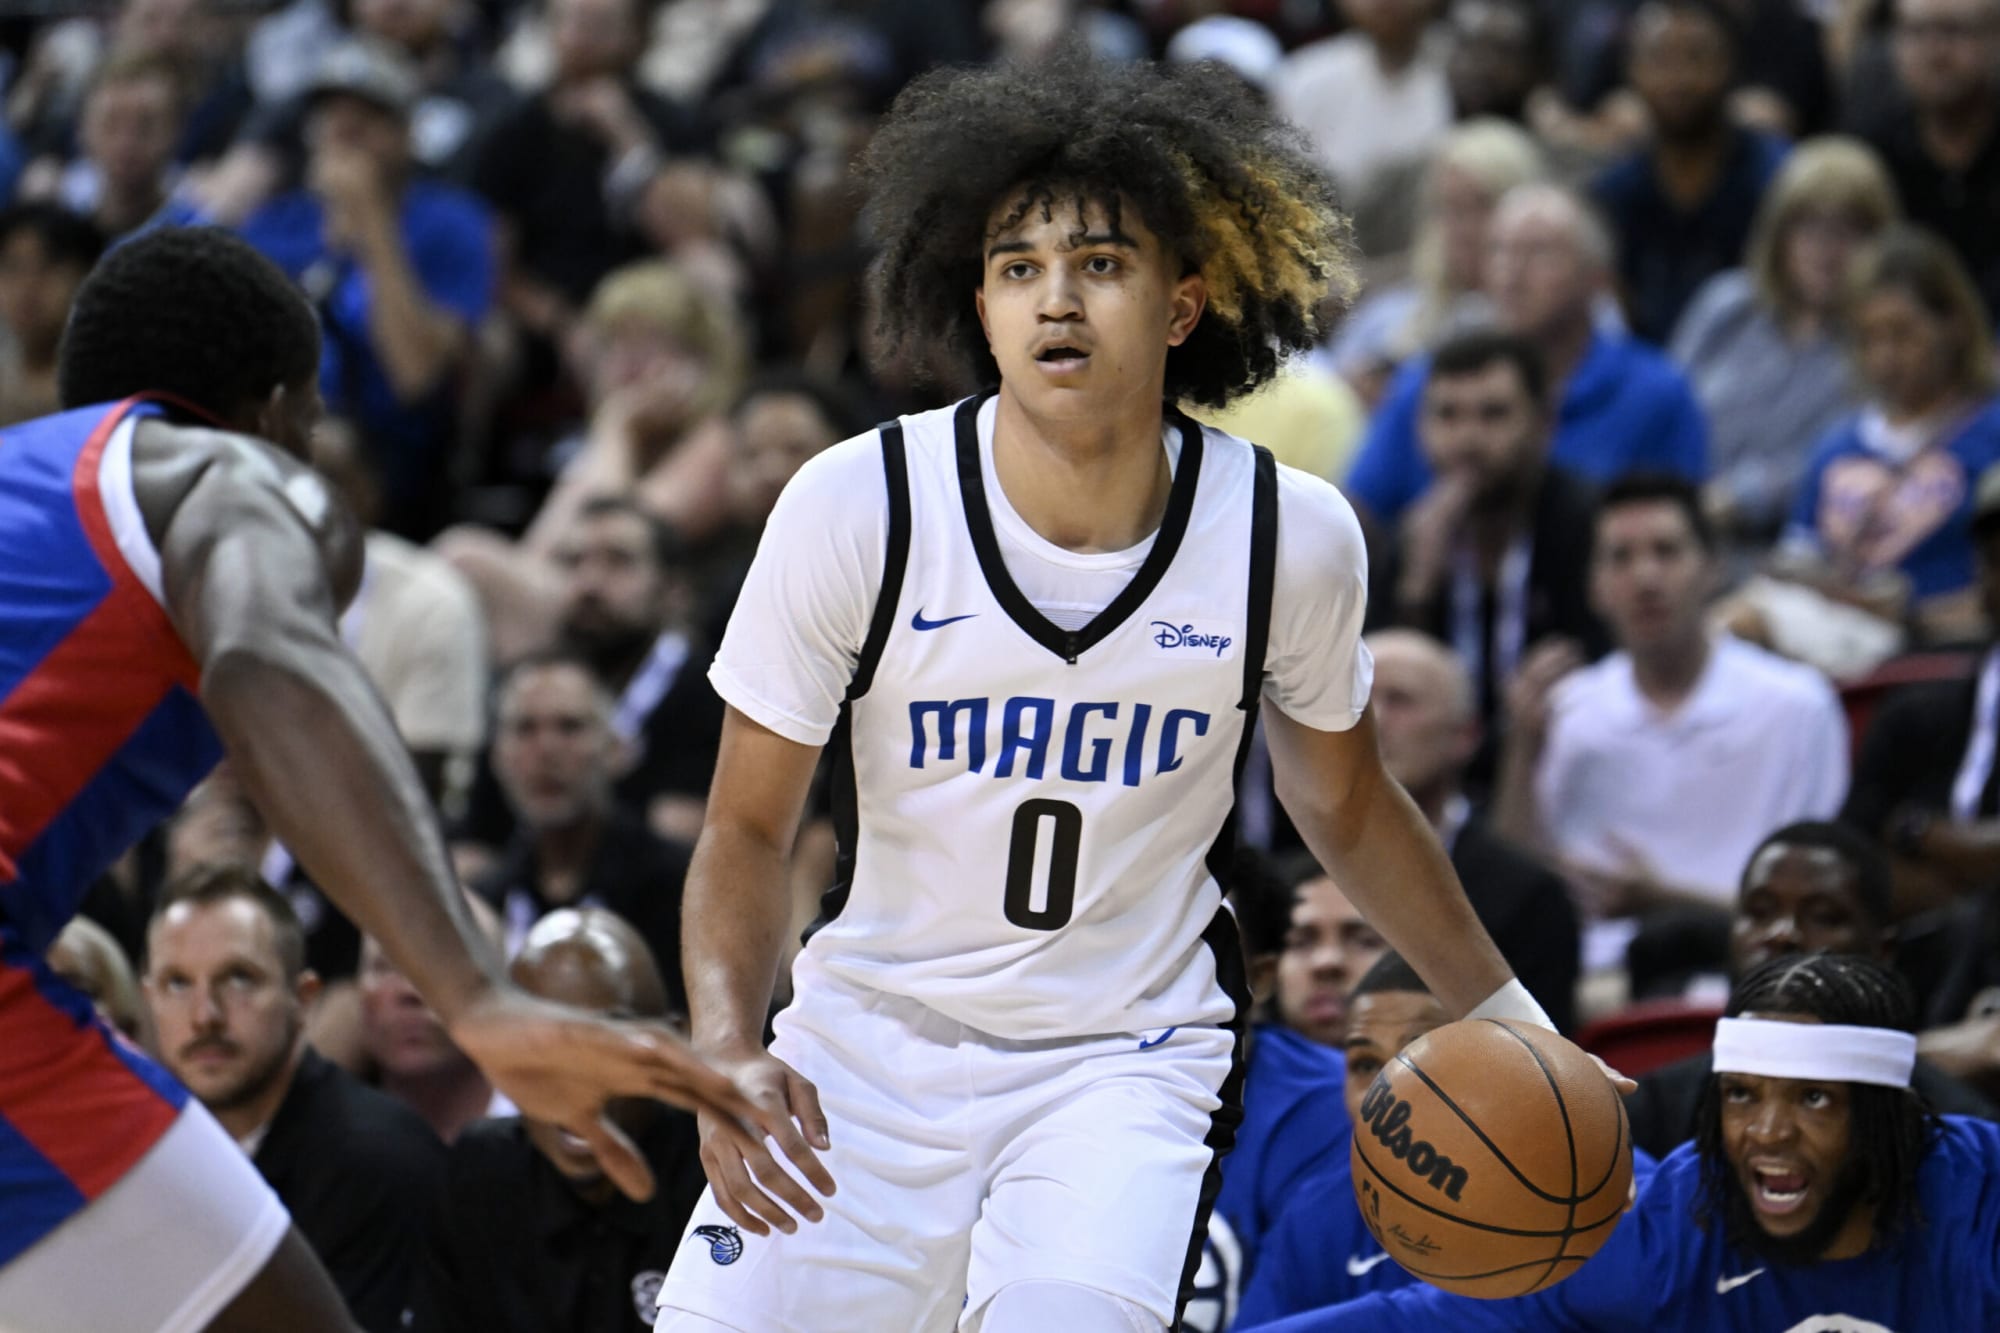 Mixed results from Orlando Magic rookies in first summer league game